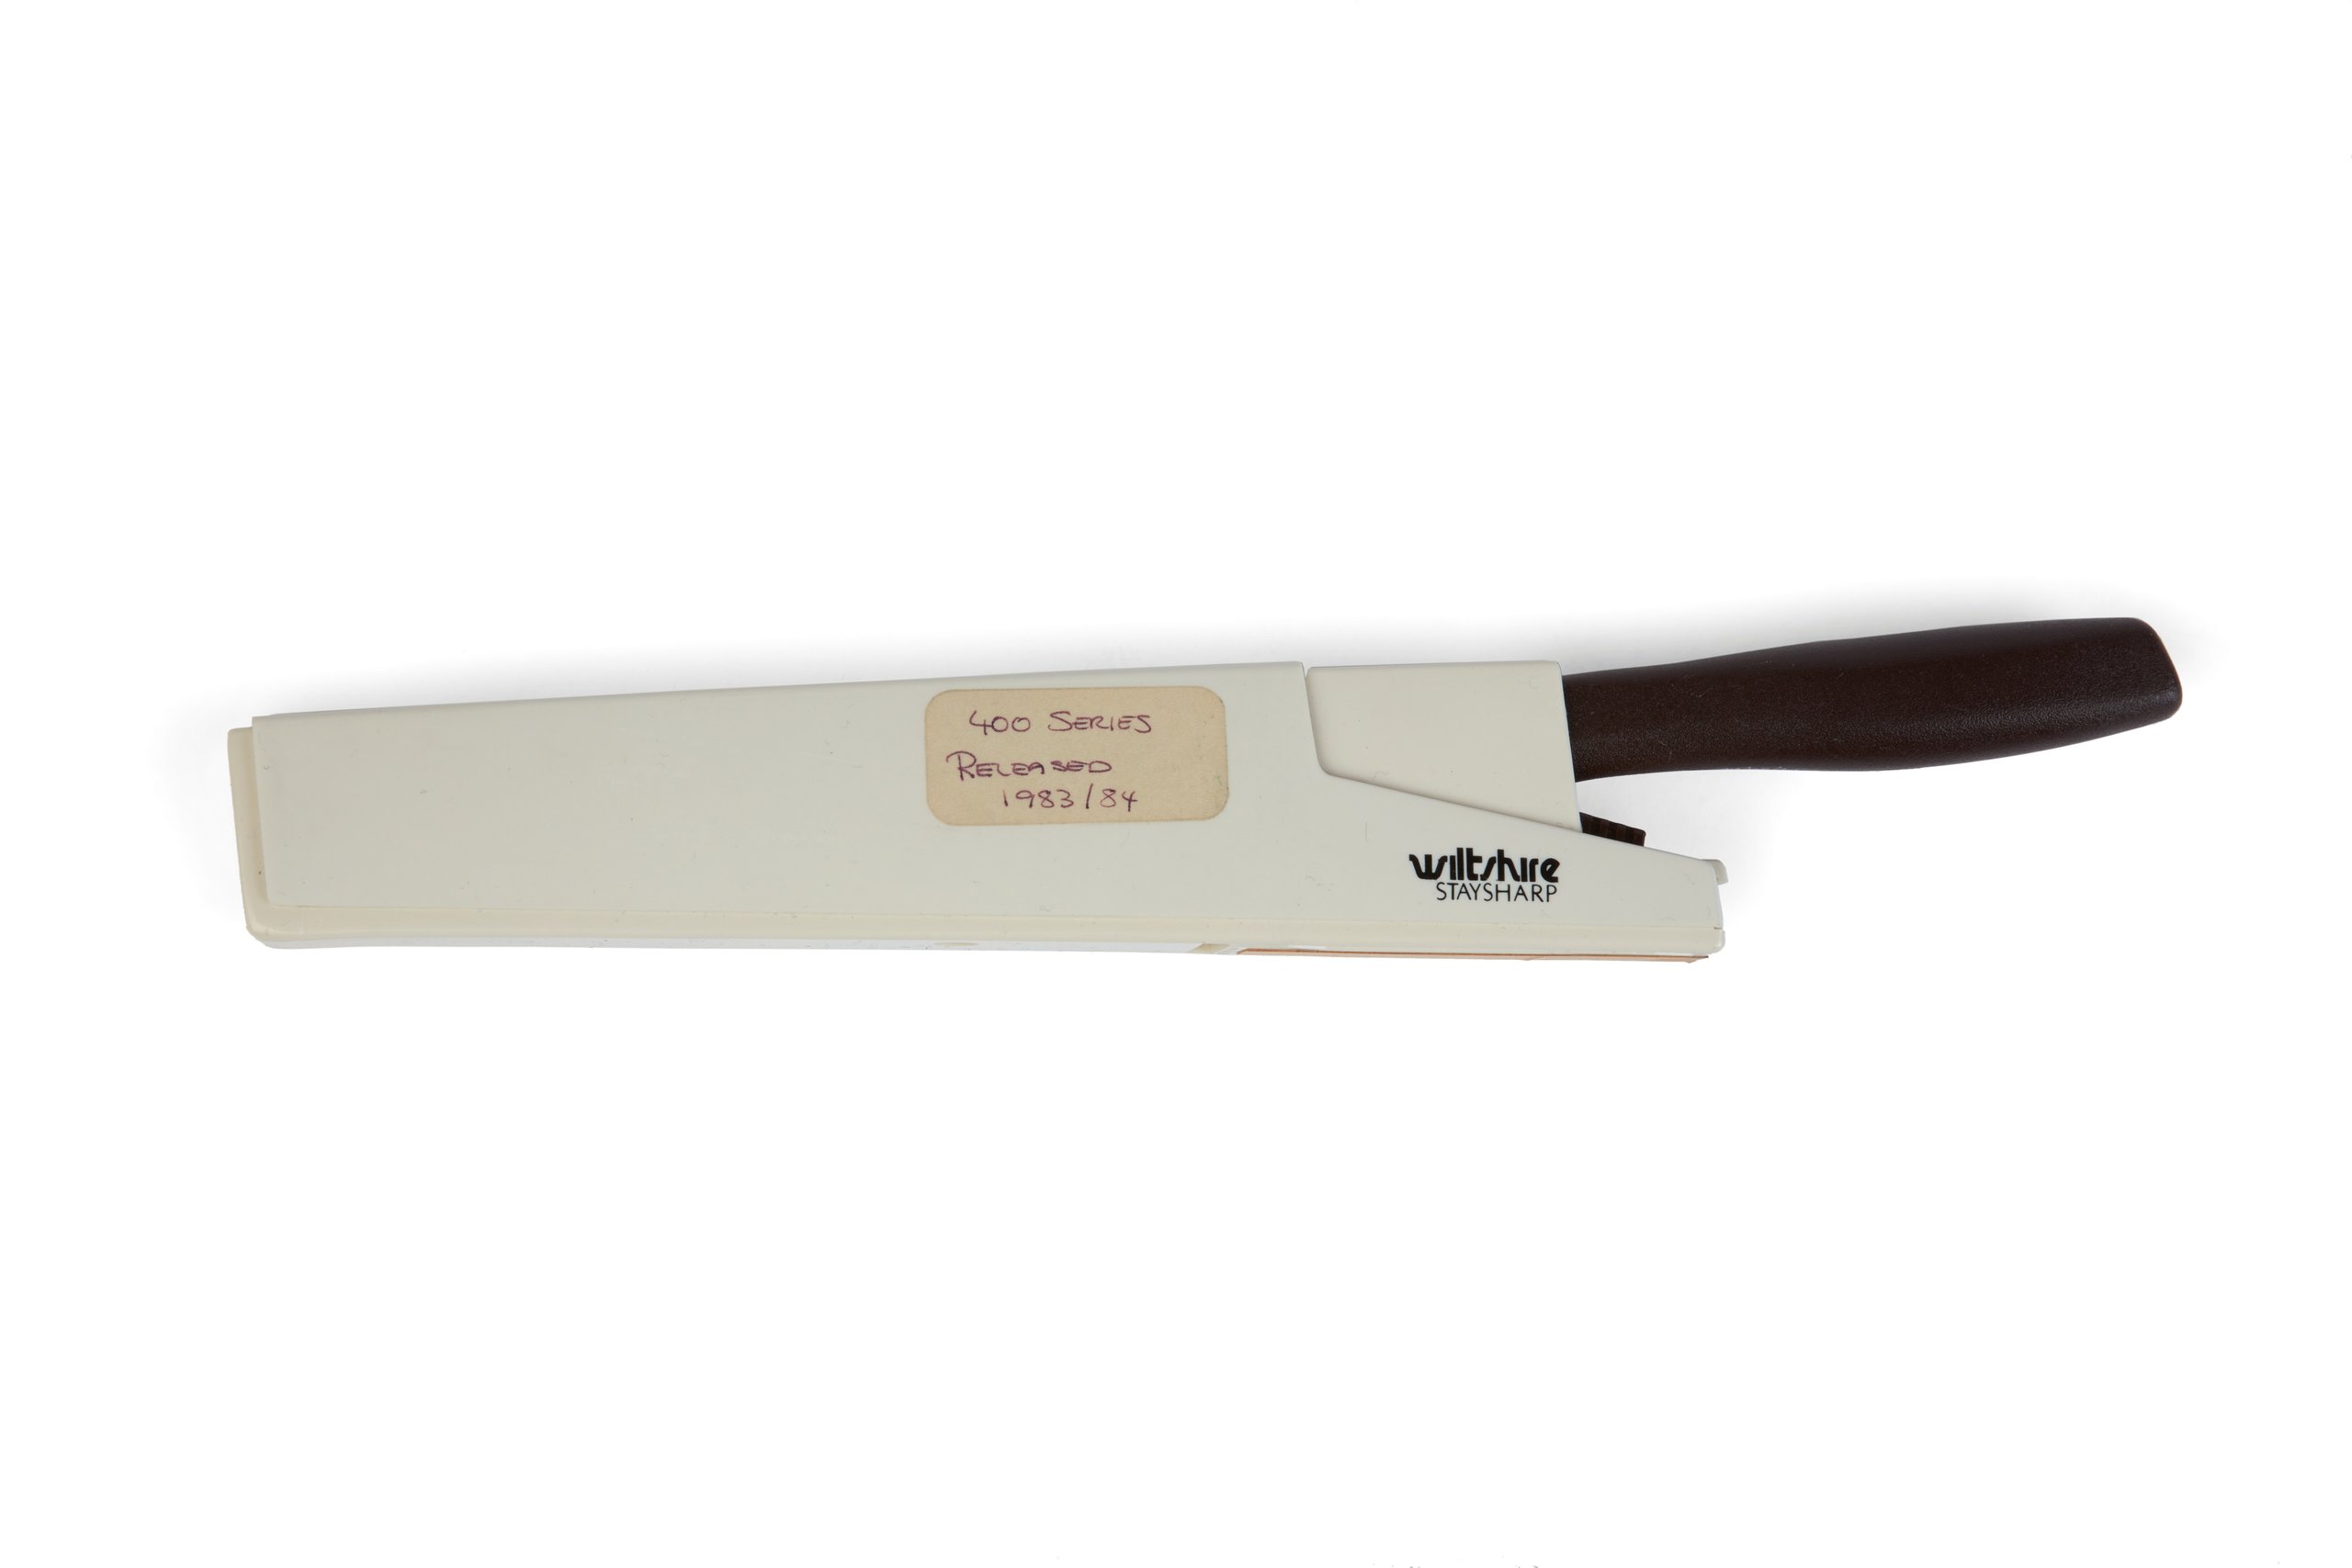 Wiltshire Staysharp knife and scabbard series 400